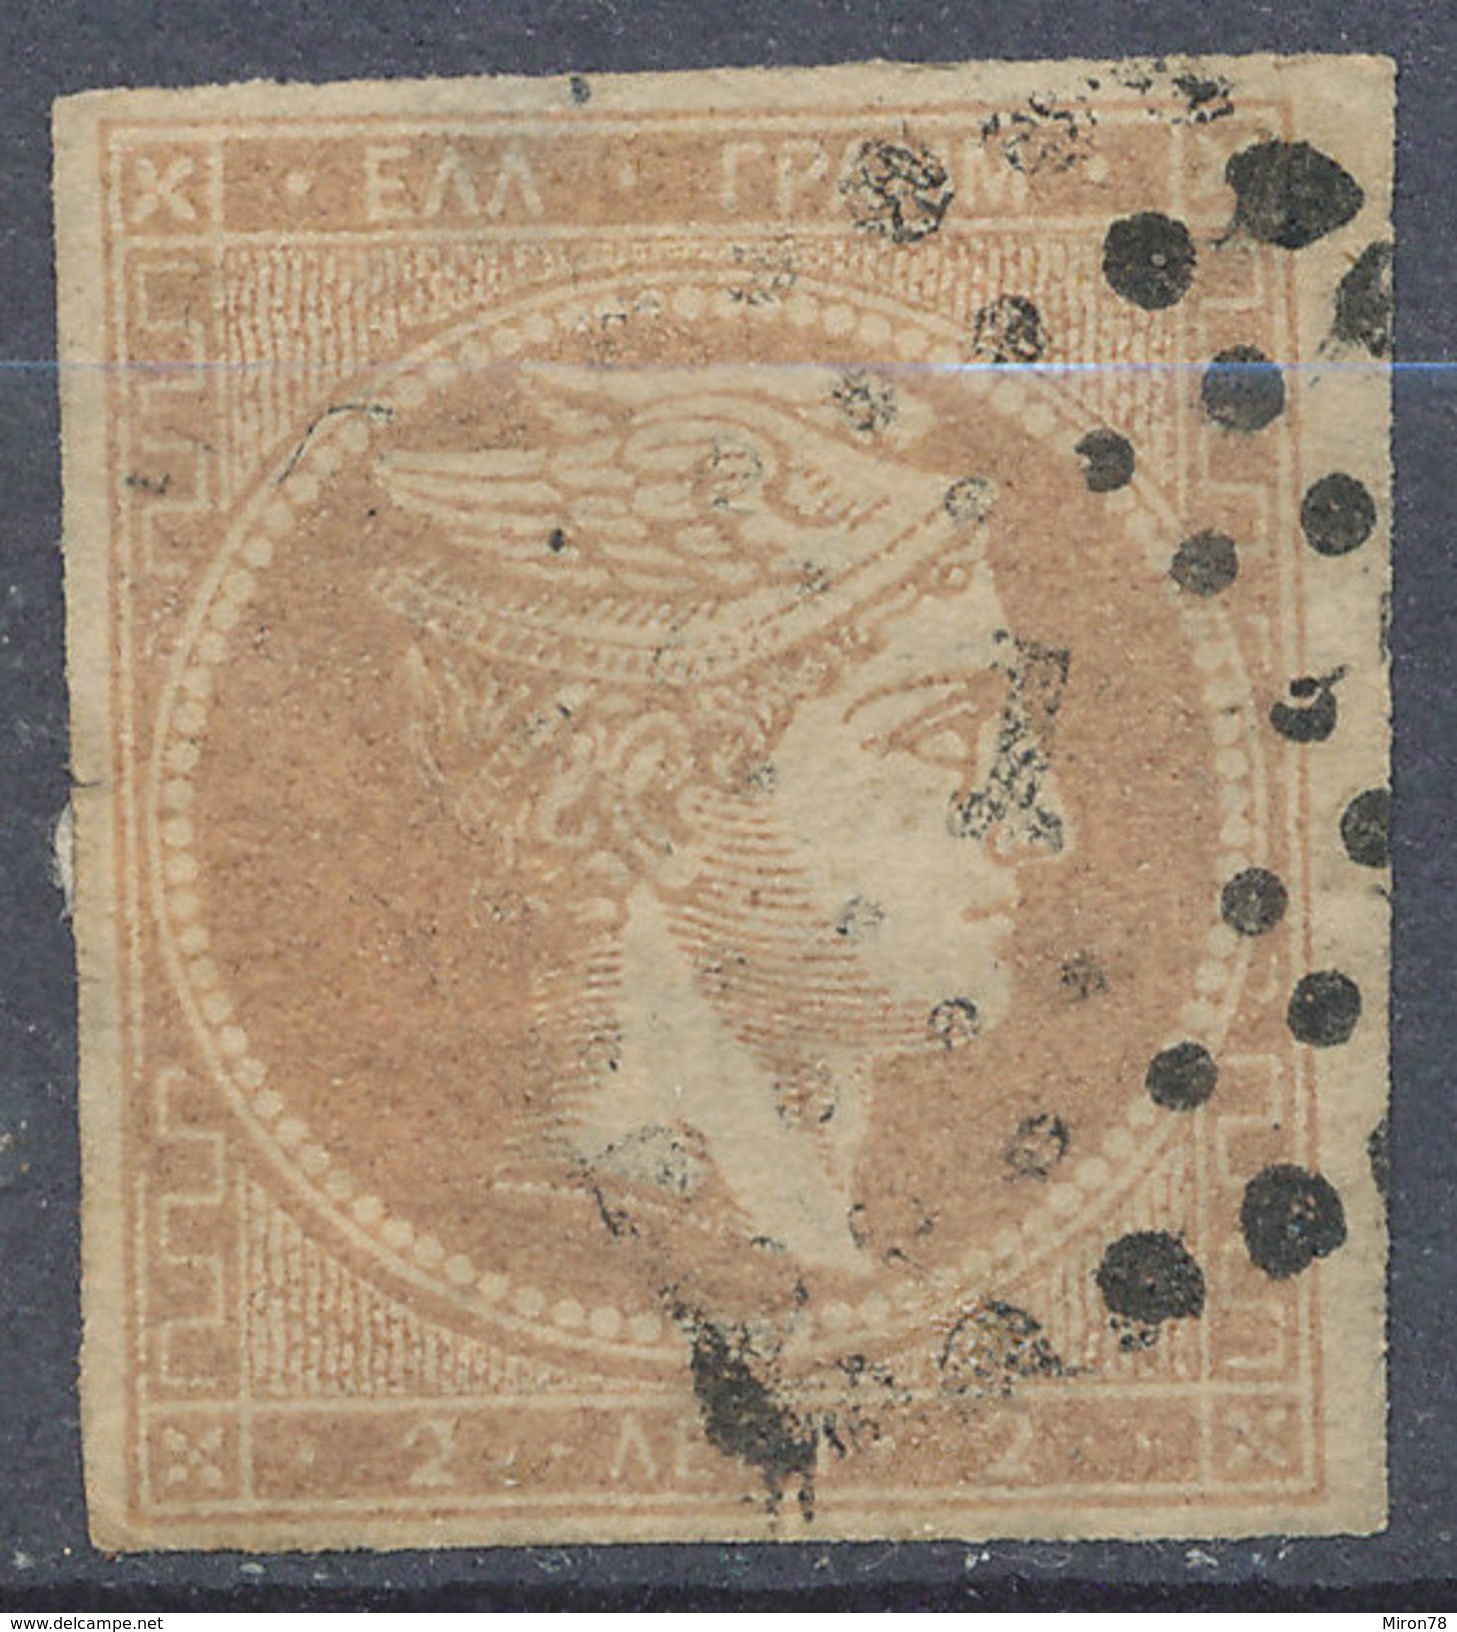 Stamp Greece Large Germes 2l Used - Used Stamps